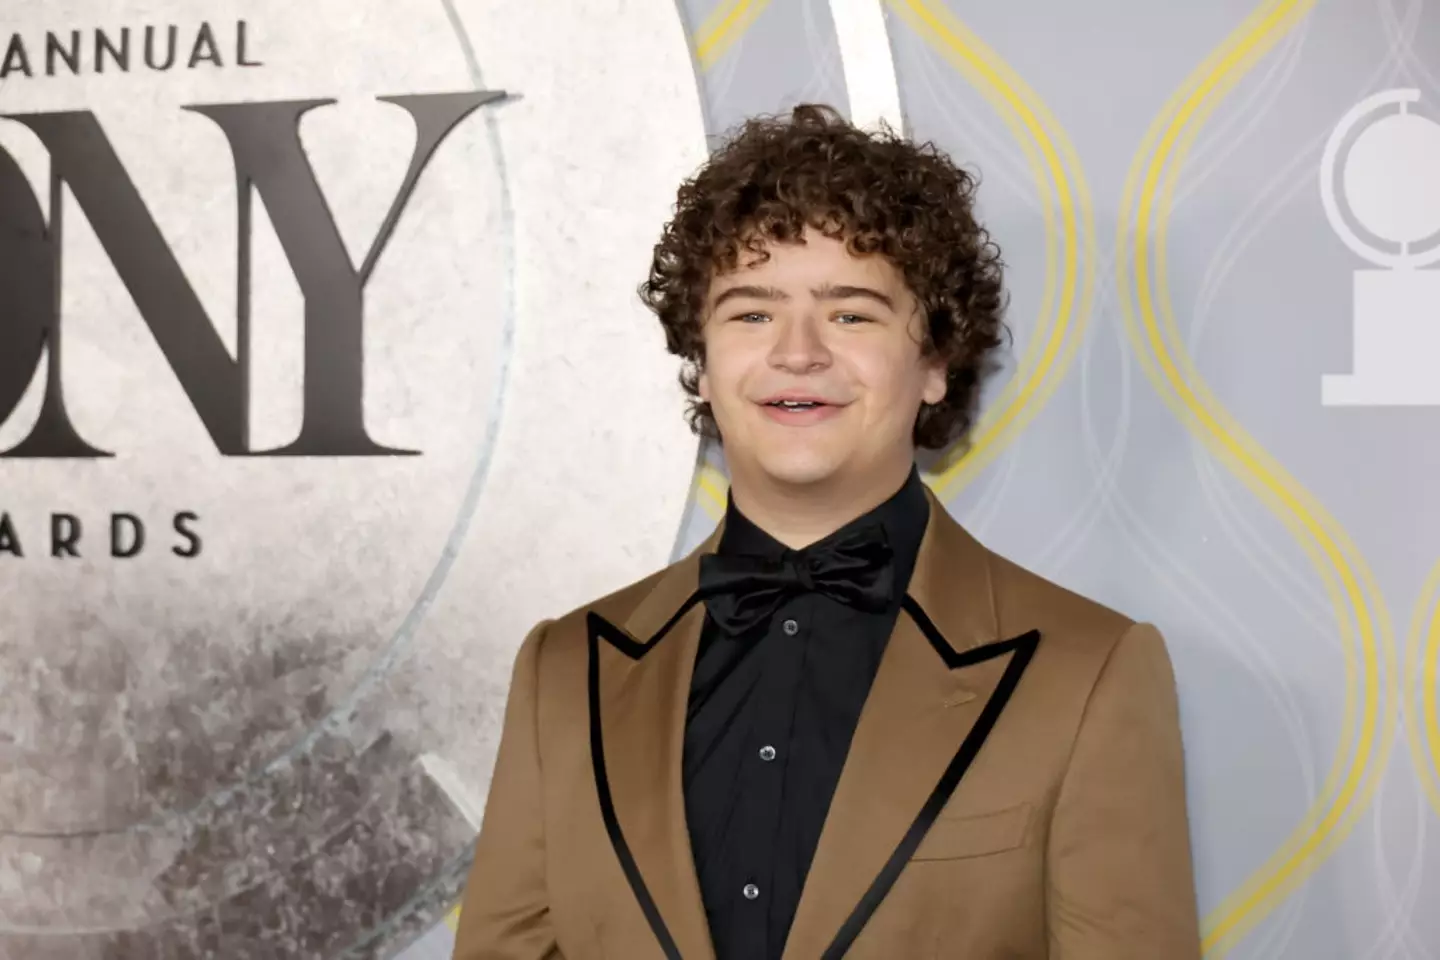 Gaten Matarazzo is almost done with Stranger Things and he reckons the show could do with shaking things up for the final season.